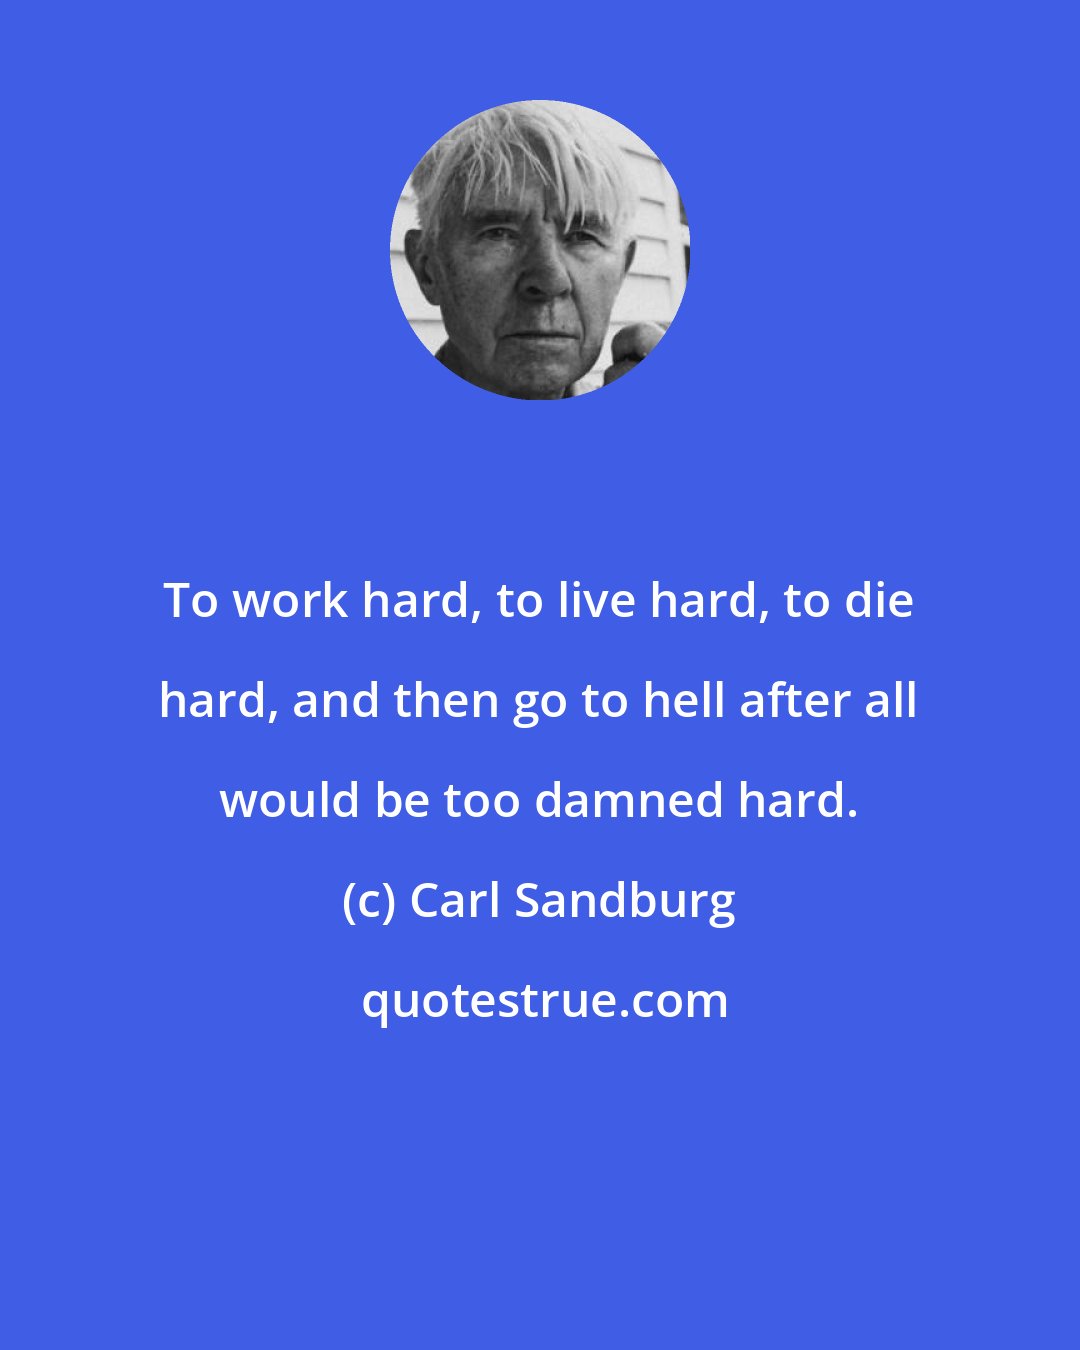 Carl Sandburg: To work hard, to live hard, to die hard, and then go to hell after all would be too damned hard.